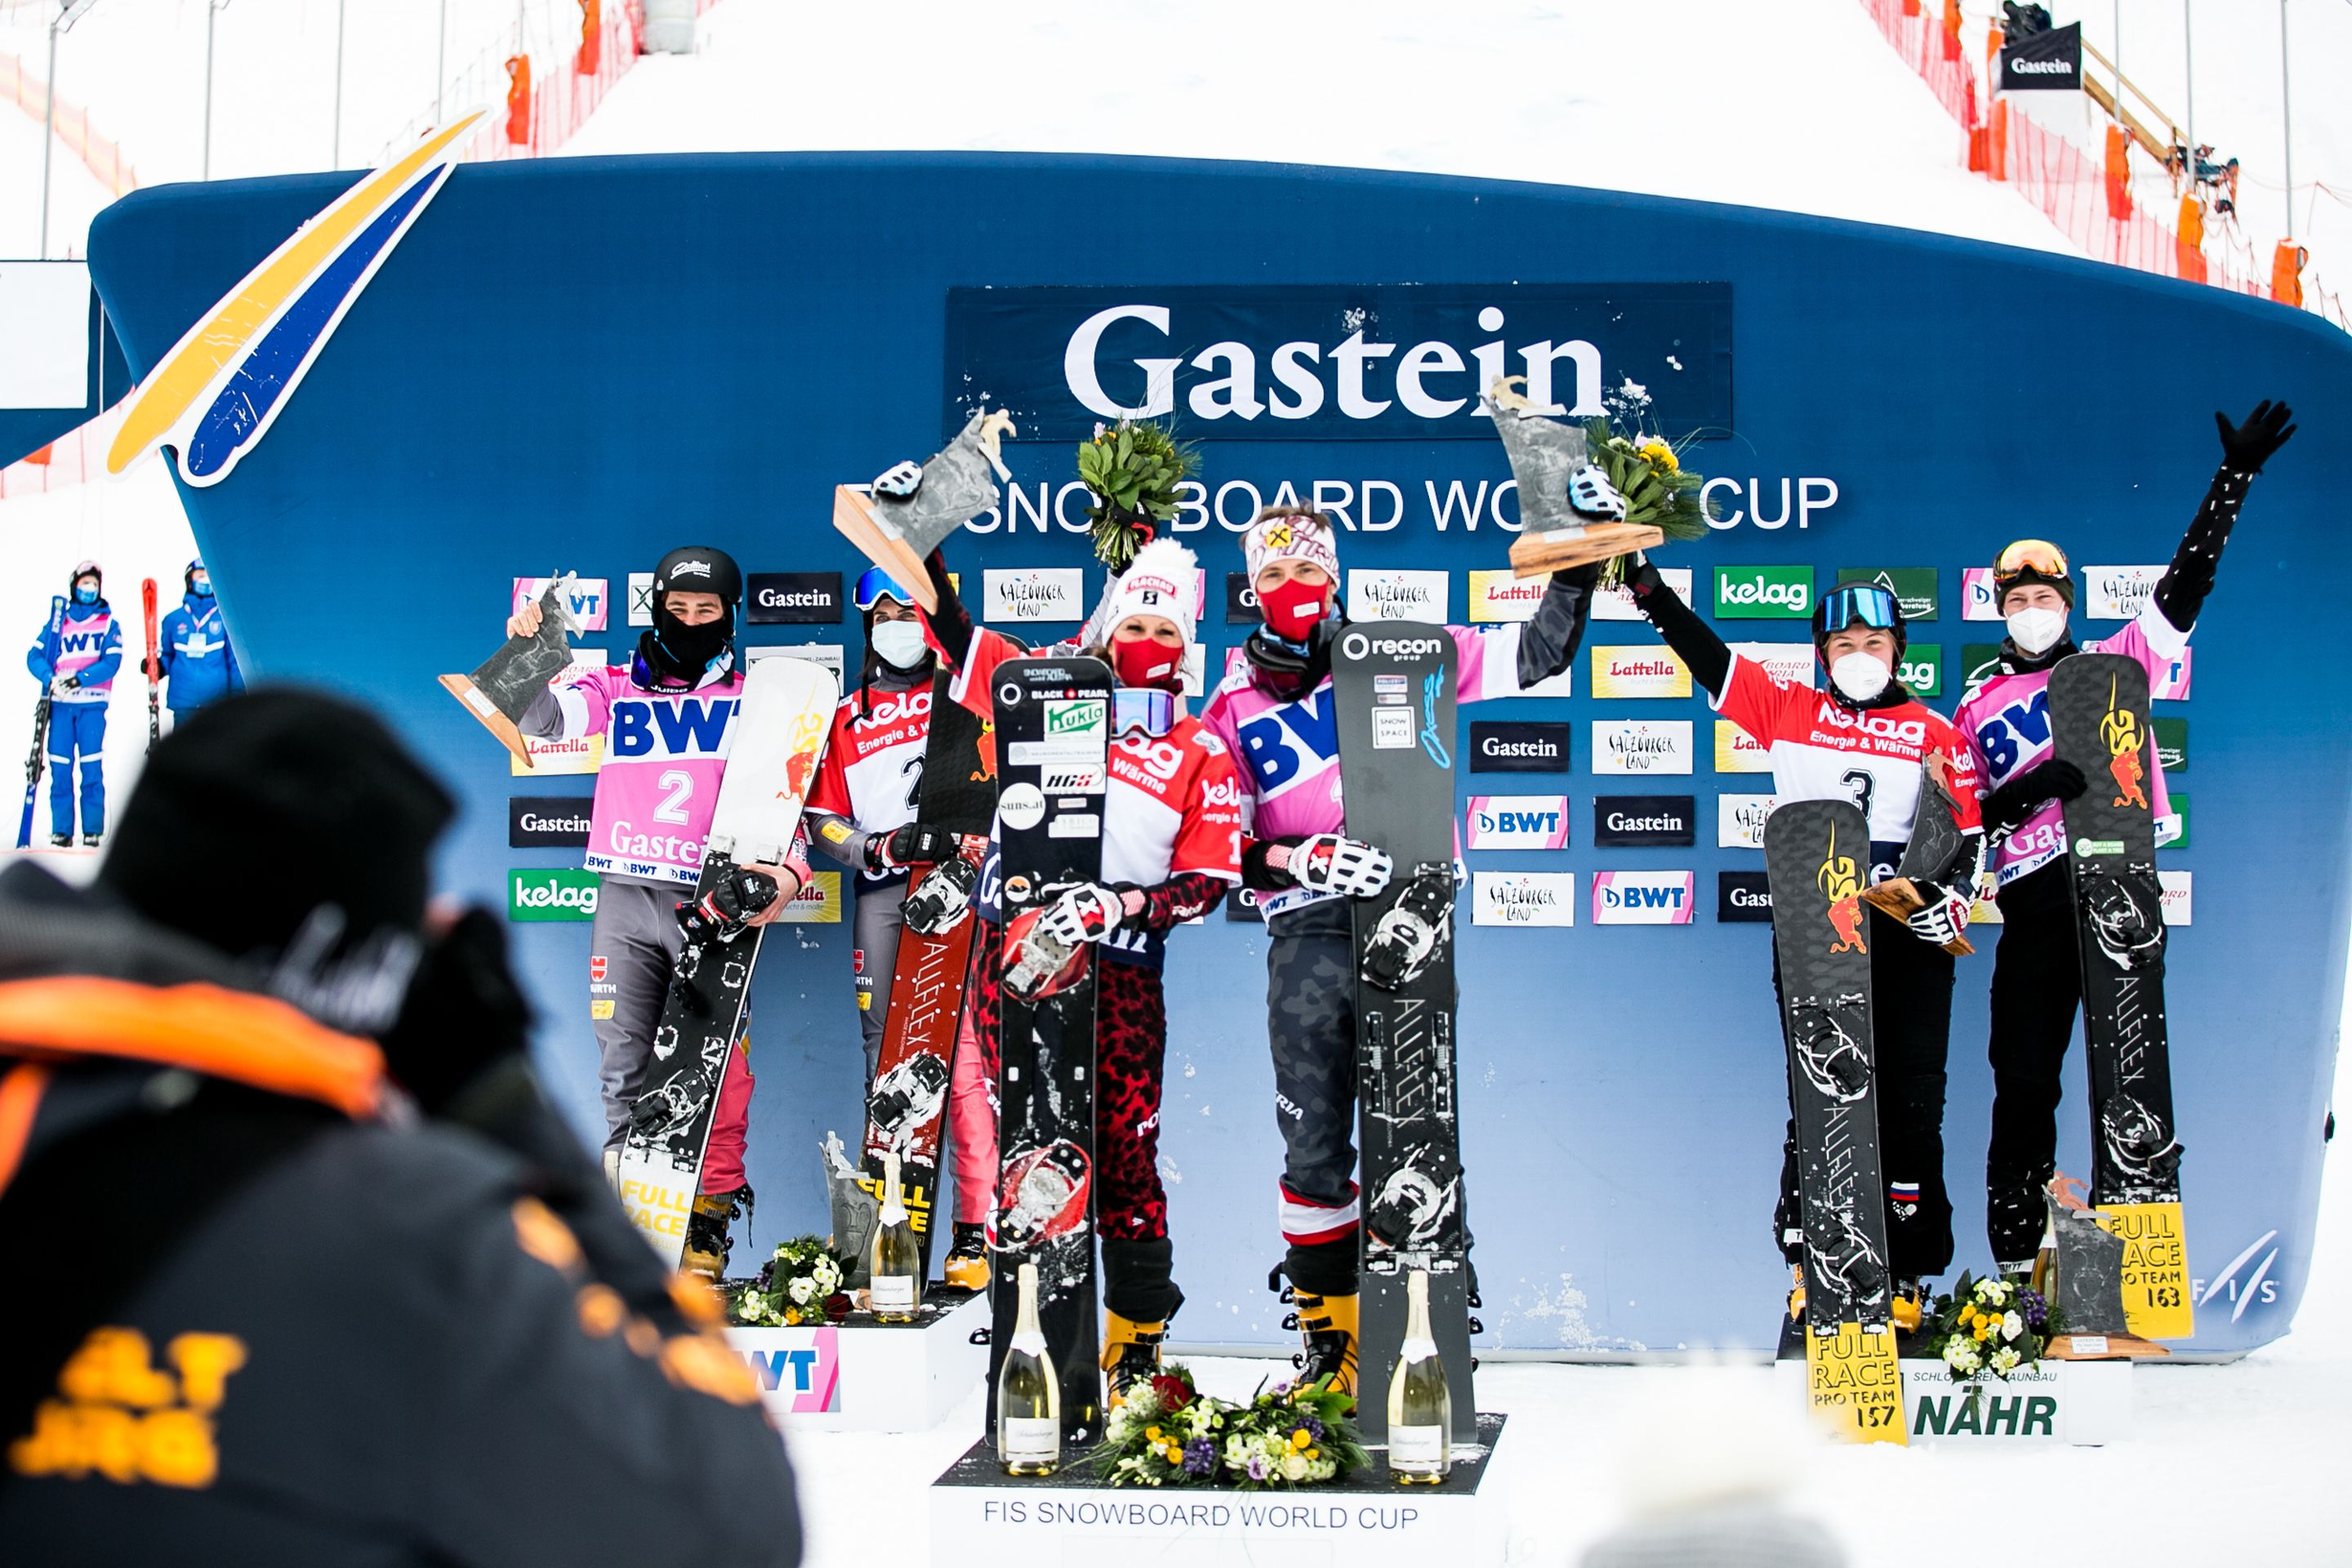 Podium at the FIS Snowboard Parallel Slalom Mixed Team World Cup event in Bad Gastein (AUT).ltr 2nd Germany (Baumeister,Loch), 1st Austria (Riegler, Prommegger), 3rd Russia (Nadyrshina, Loginov). Photo: Chad Buchholz (FIS)